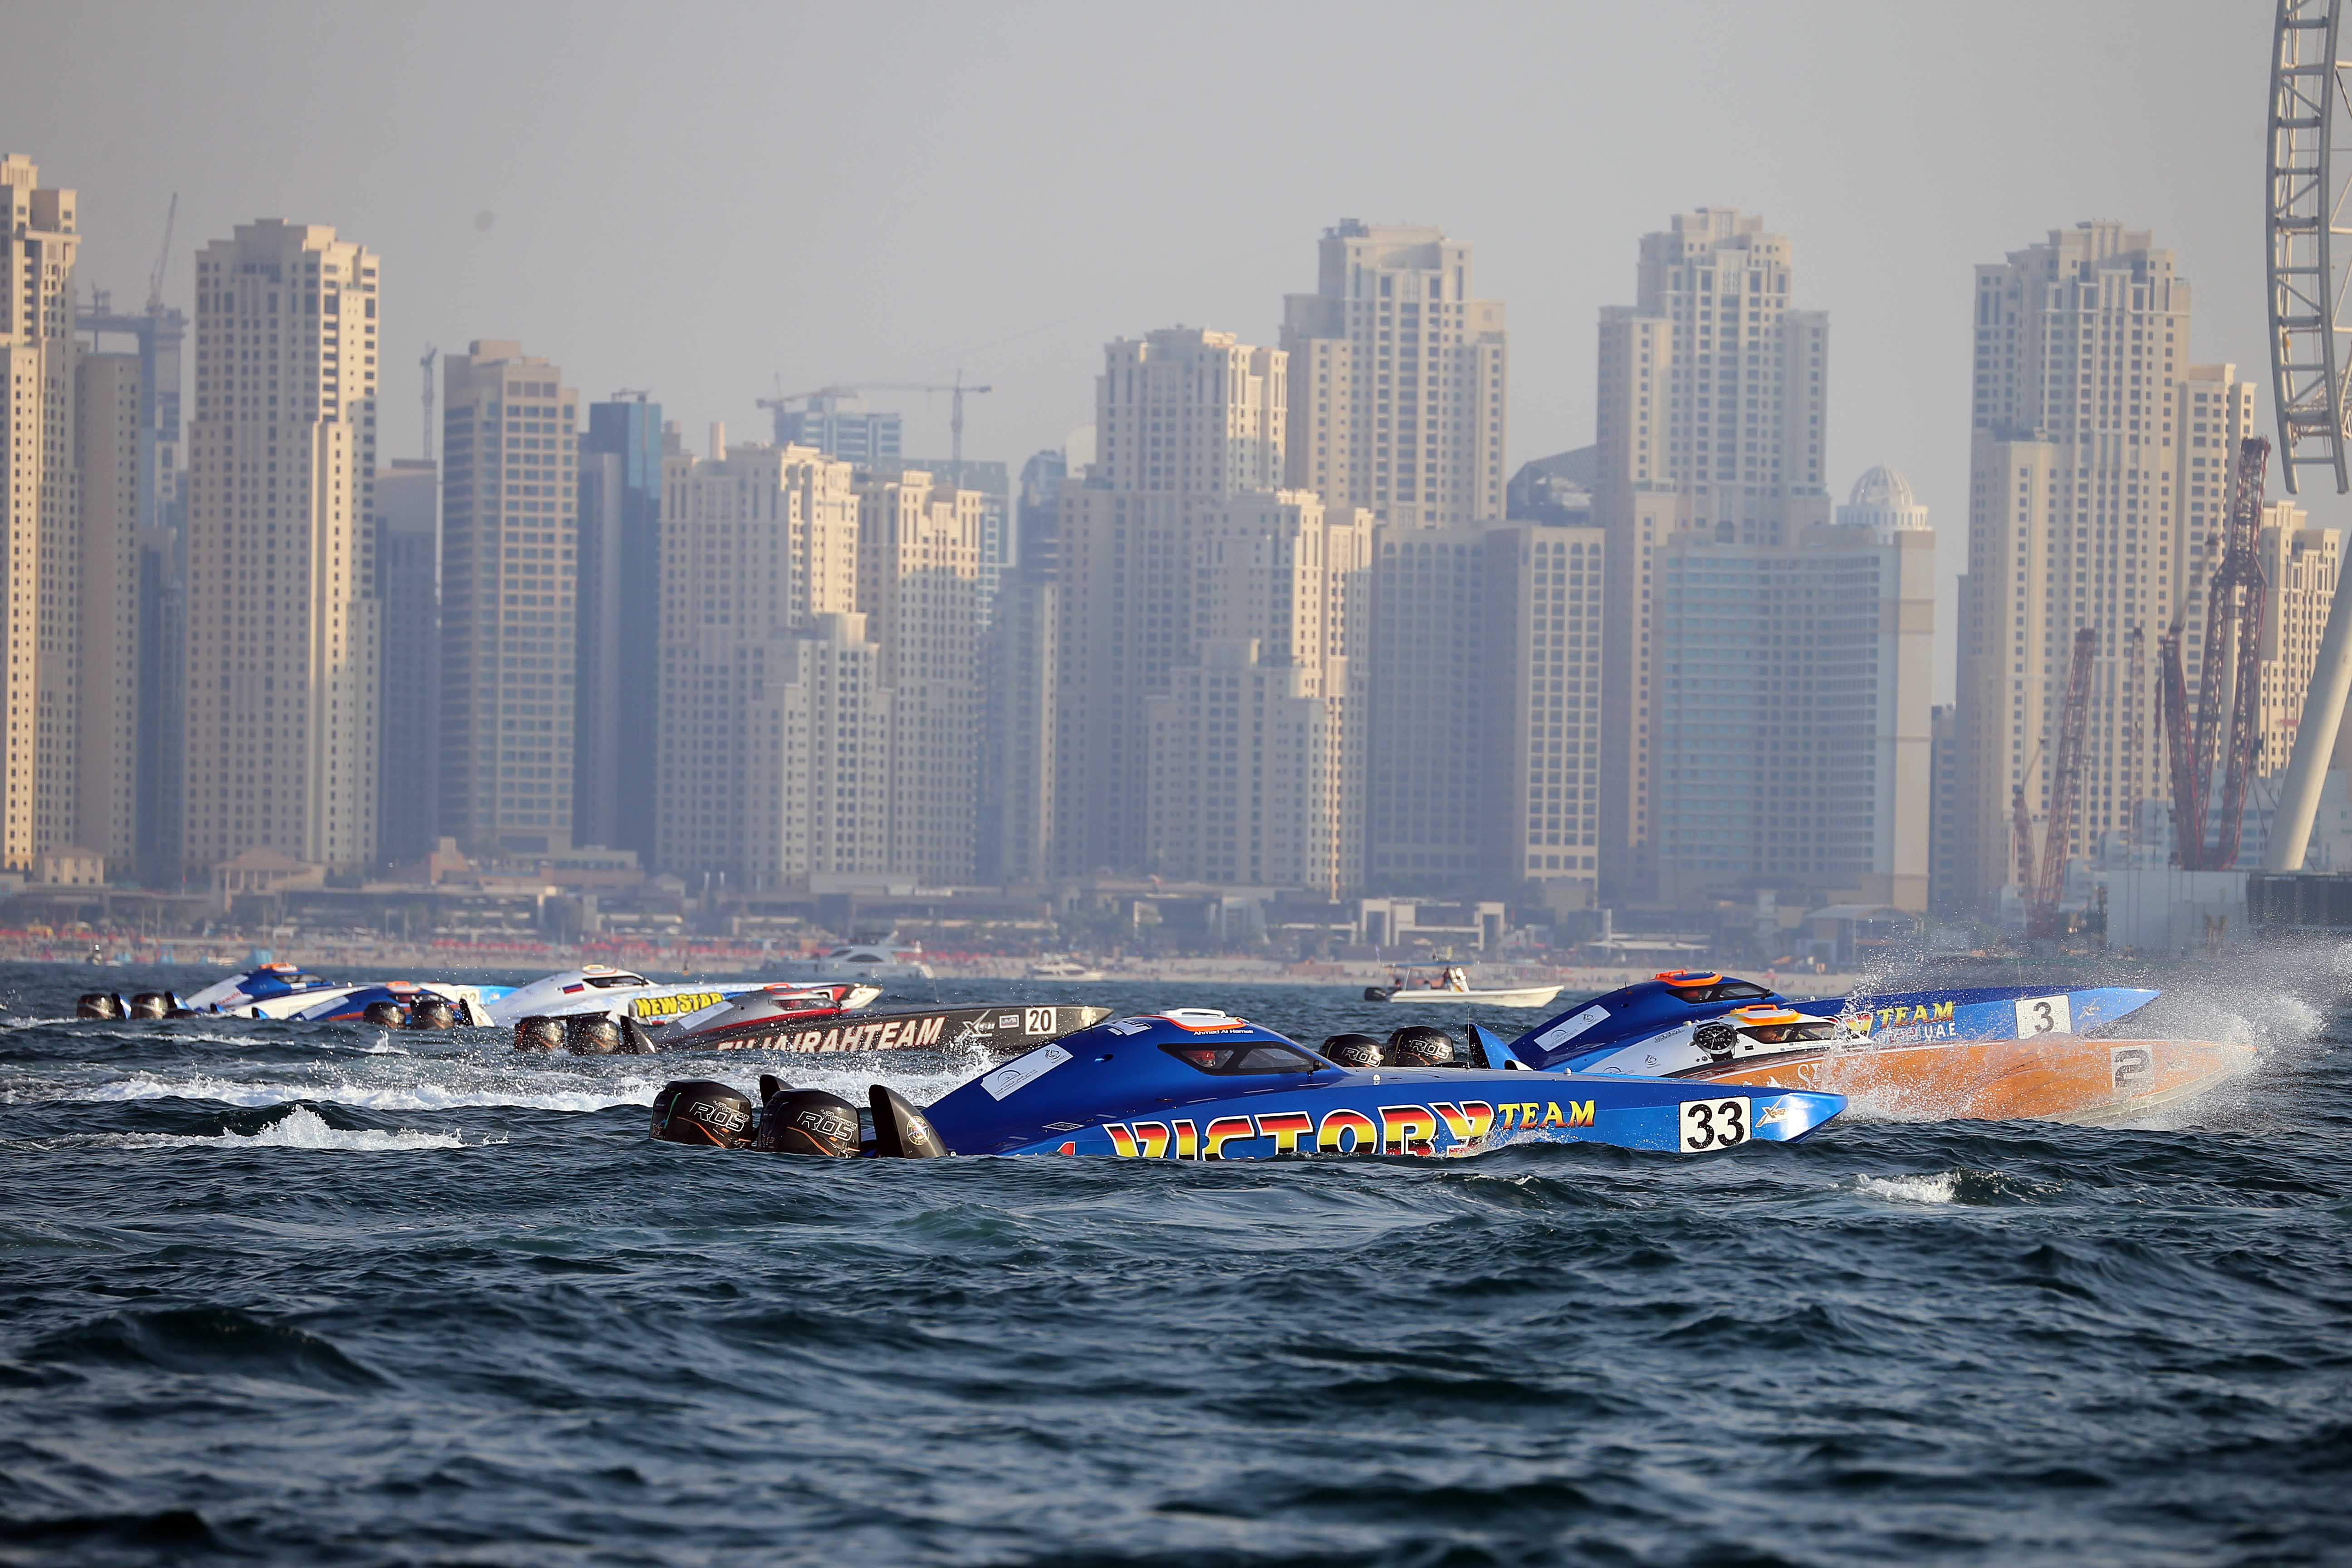 12 boats will compete for the Final Round of the XCAT World Powerboat Championship